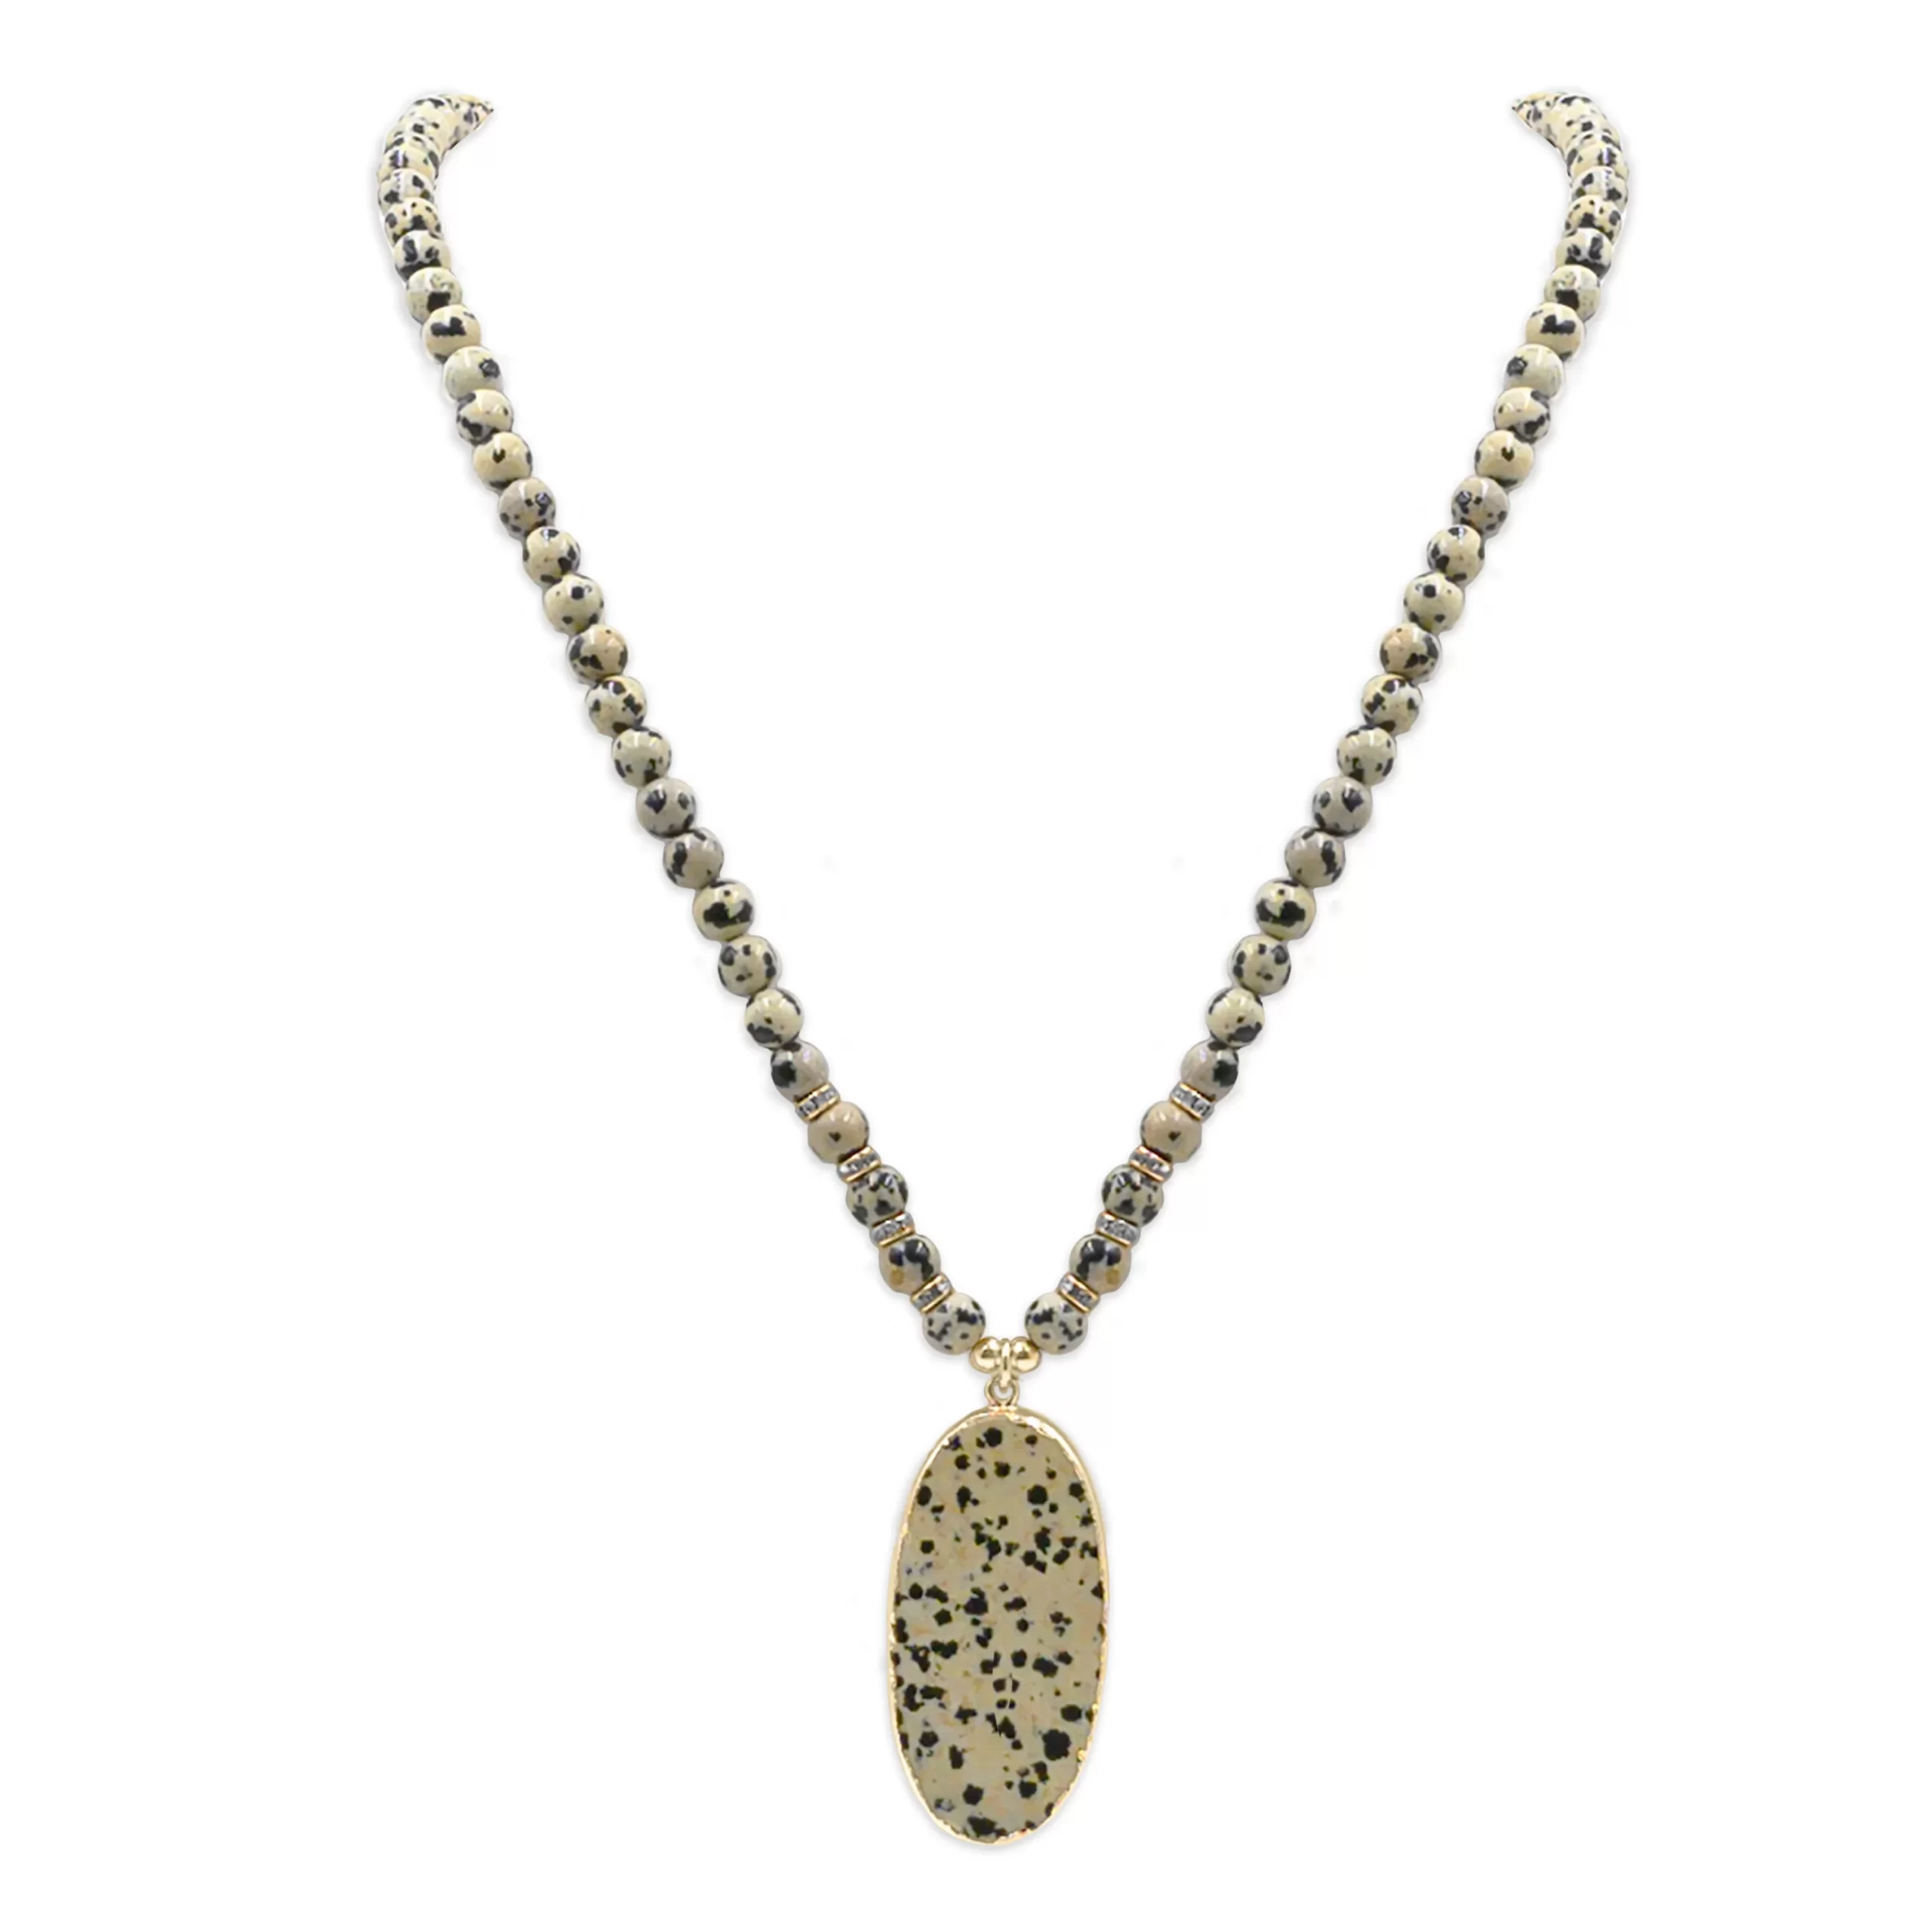 SPECKLE NECKLACE